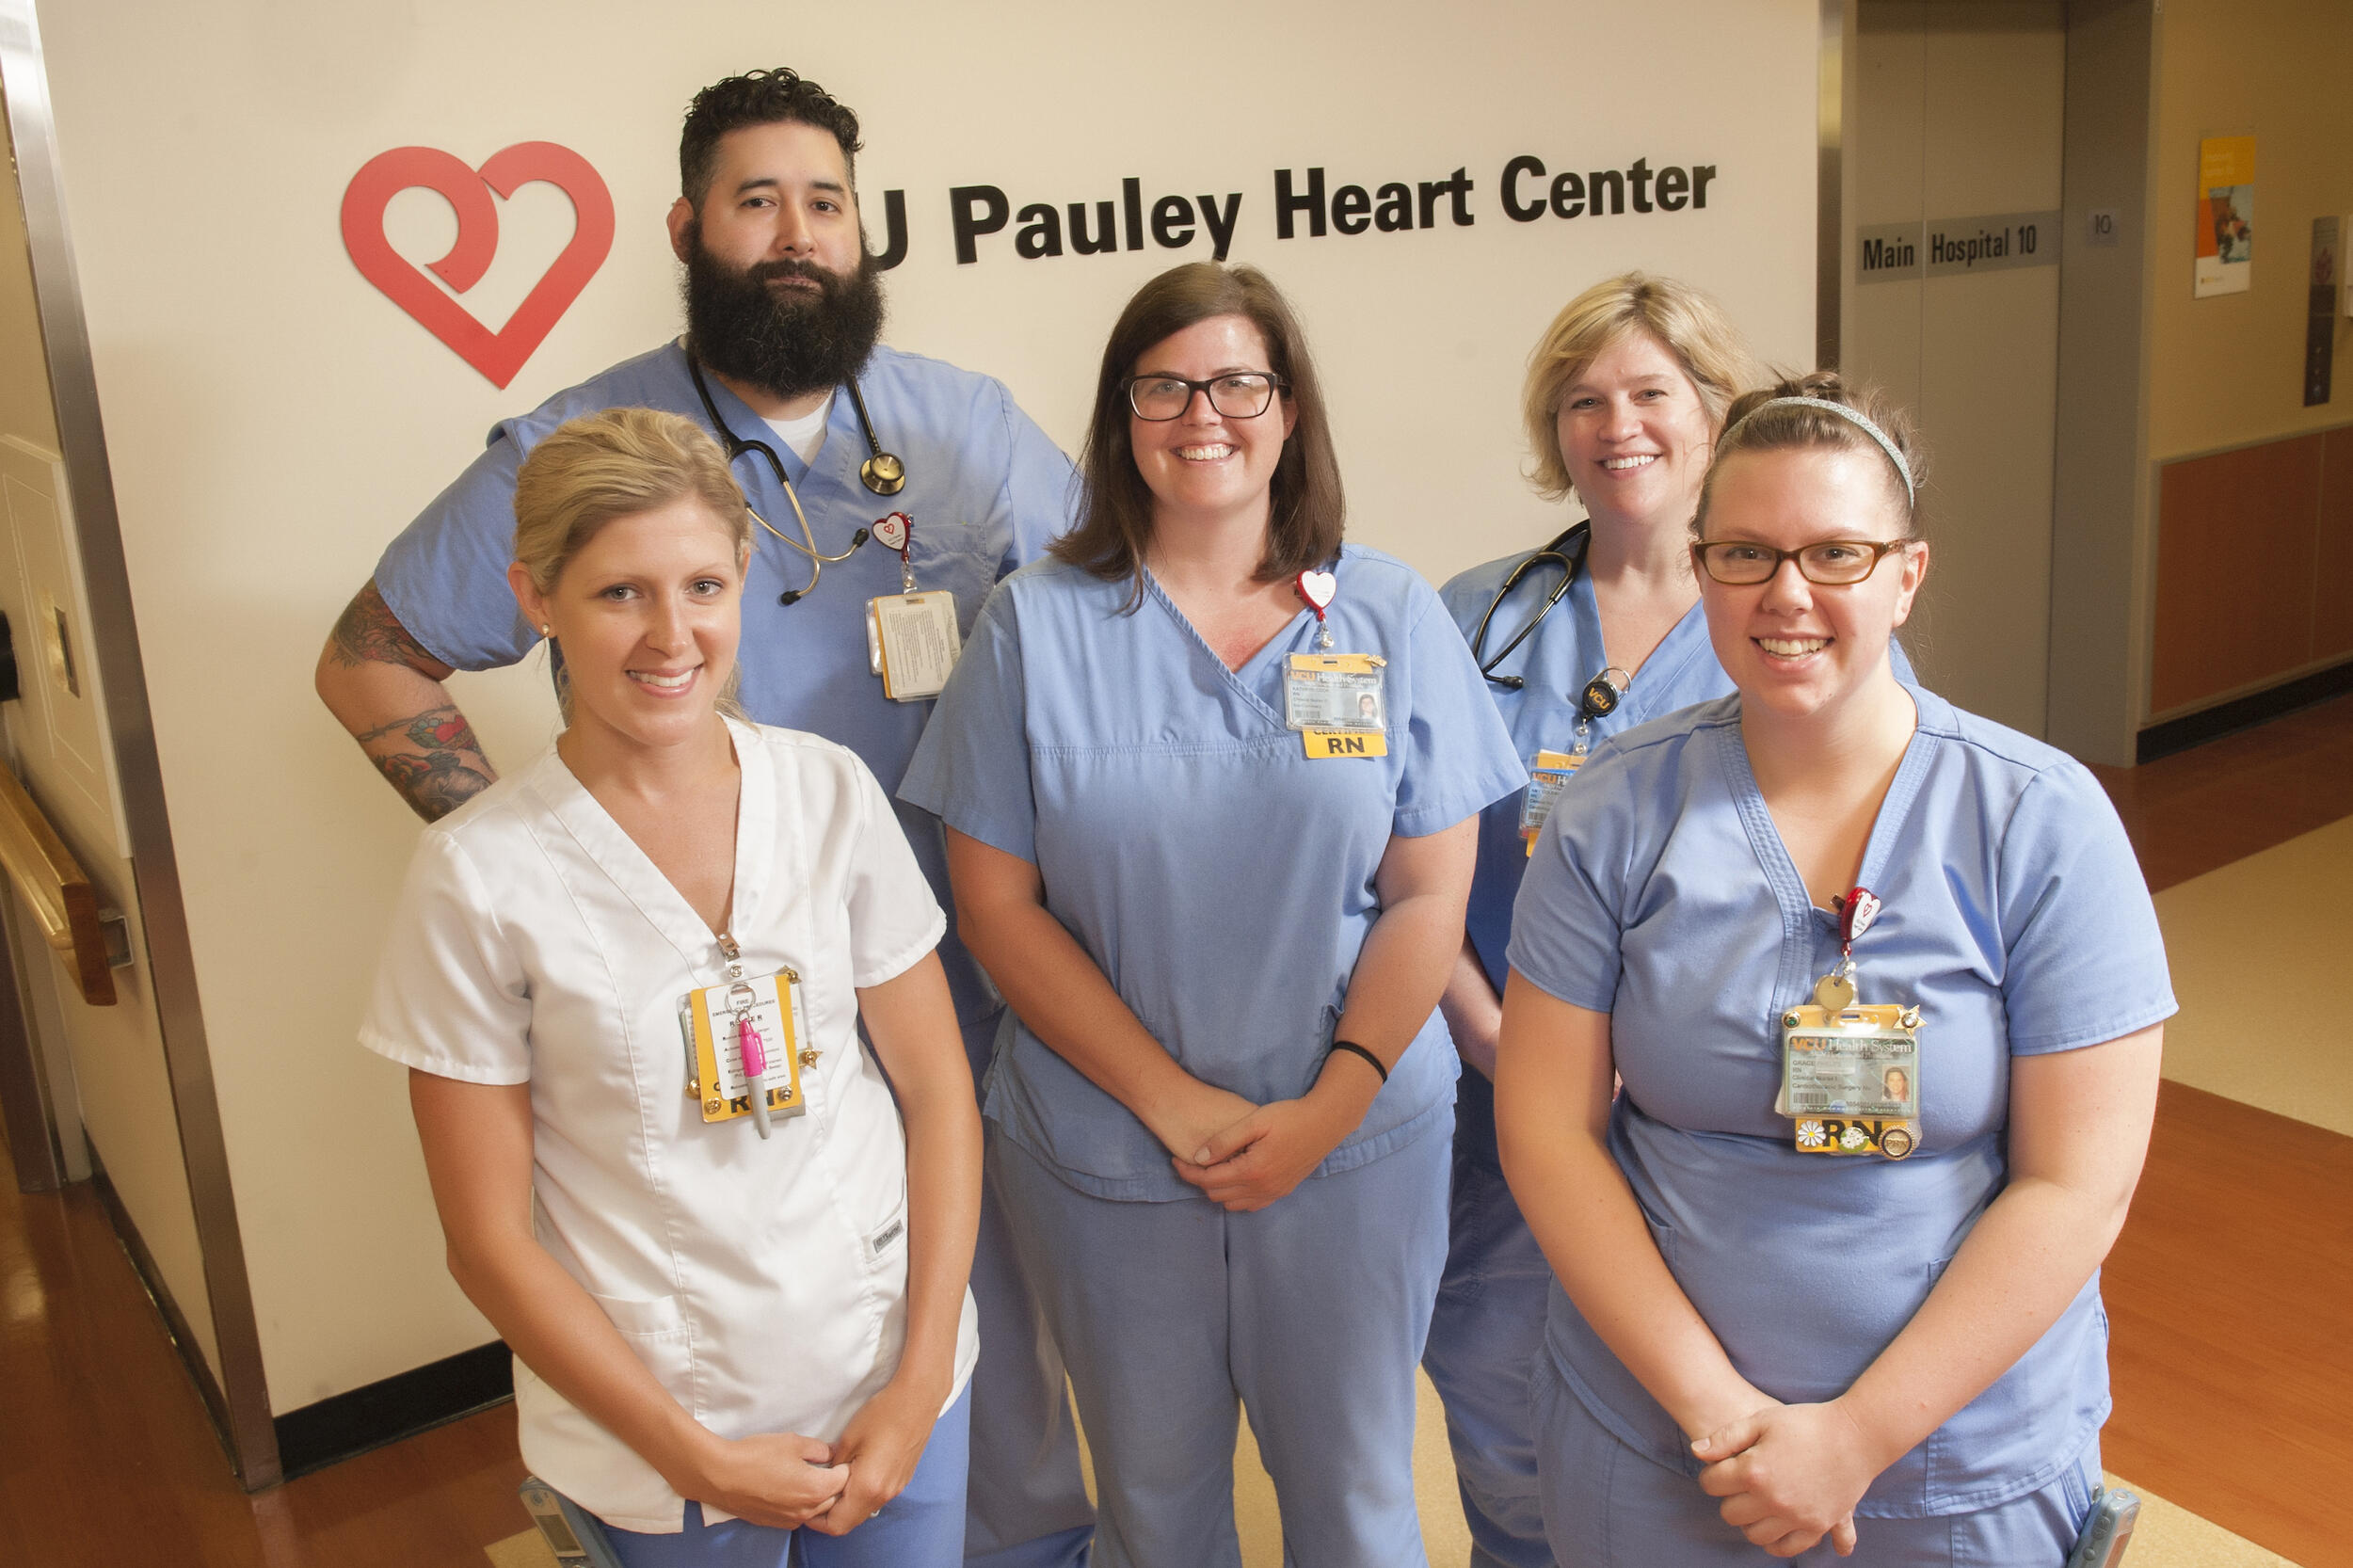 Five medical professional stands in front of a V C U Pauley Heart Center sign and logo on a wall.